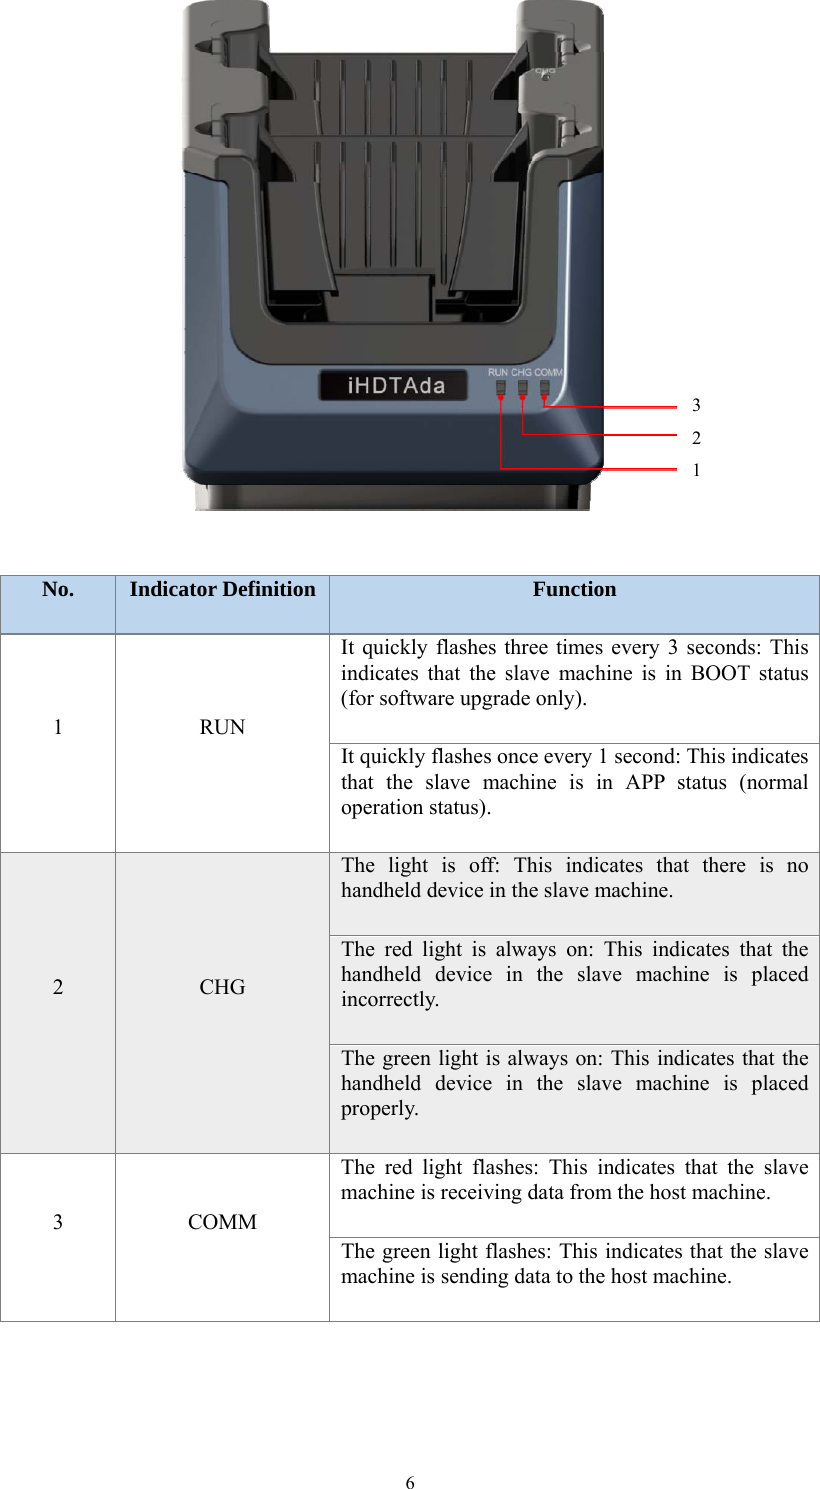 6  No.  Indicator Definition  Function 1 RUN It quickly flashes three times every 3 seconds: This indicates that the slave machine is in BOOT status (for software upgrade only). It quickly flashes once every 1 second: This indicates that the slave machine is in APP status (normal operation status). 2  CHG The light is off: This indicates that there is no handheld device in the slave machine. The red light is always on: This indicates that the handheld device in the slave machine is placed incorrectly. The green light is always on: This indicates that the handheld device in the slave machine is placed properly. 3 COMM The red light flashes: This indicates that the slave machine is receiving data from the host machine. The green light flashes: This indicates that the slave machine is sending data to the host machine.  3 2 1 